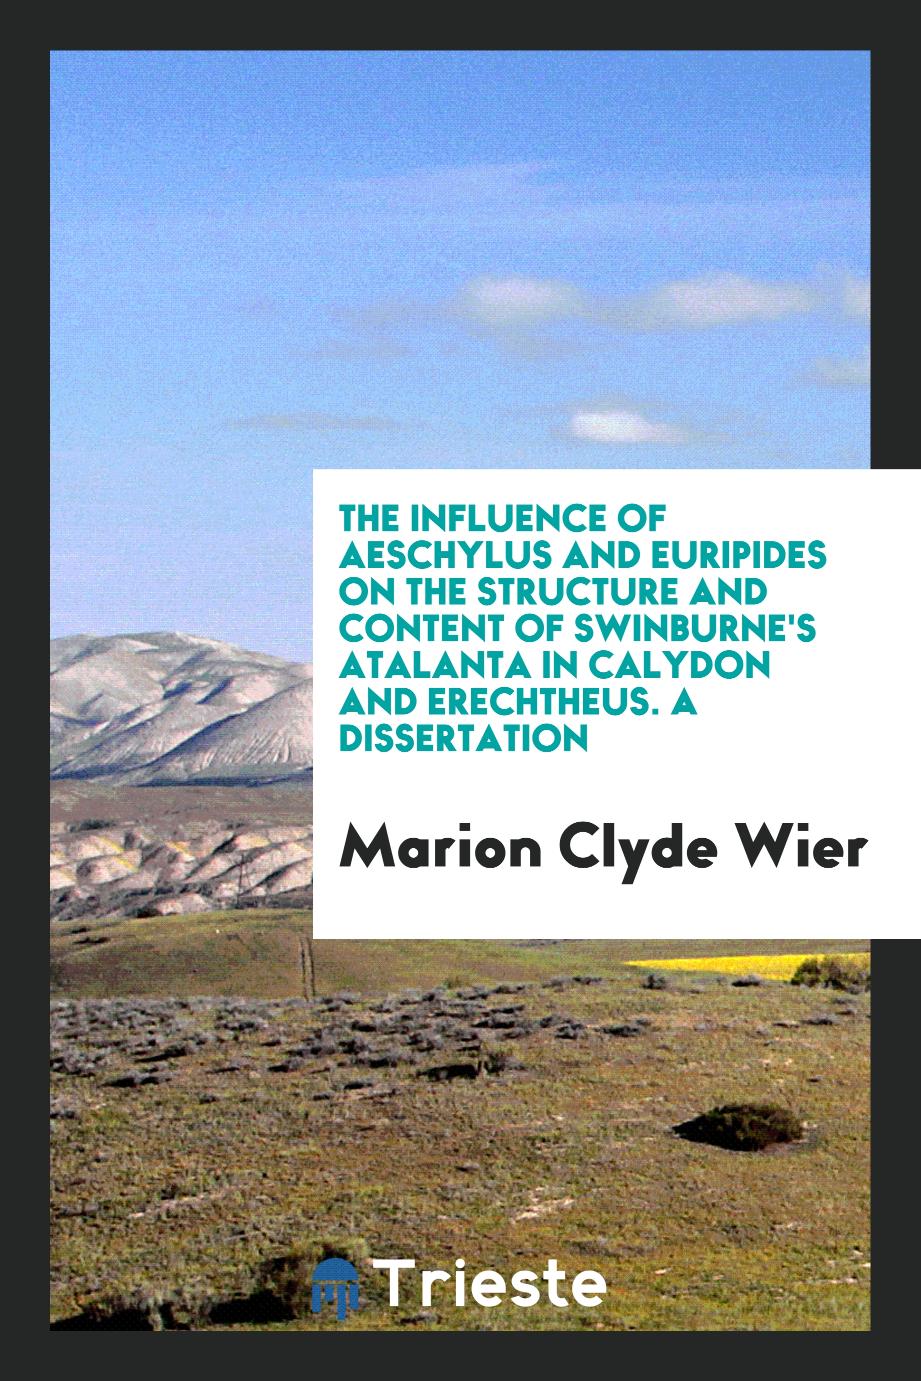 The influence of Aeschylus and Euripides on the structure and content of Swinburne's Atalanta in Calydon and Erechtheus. A dissertation